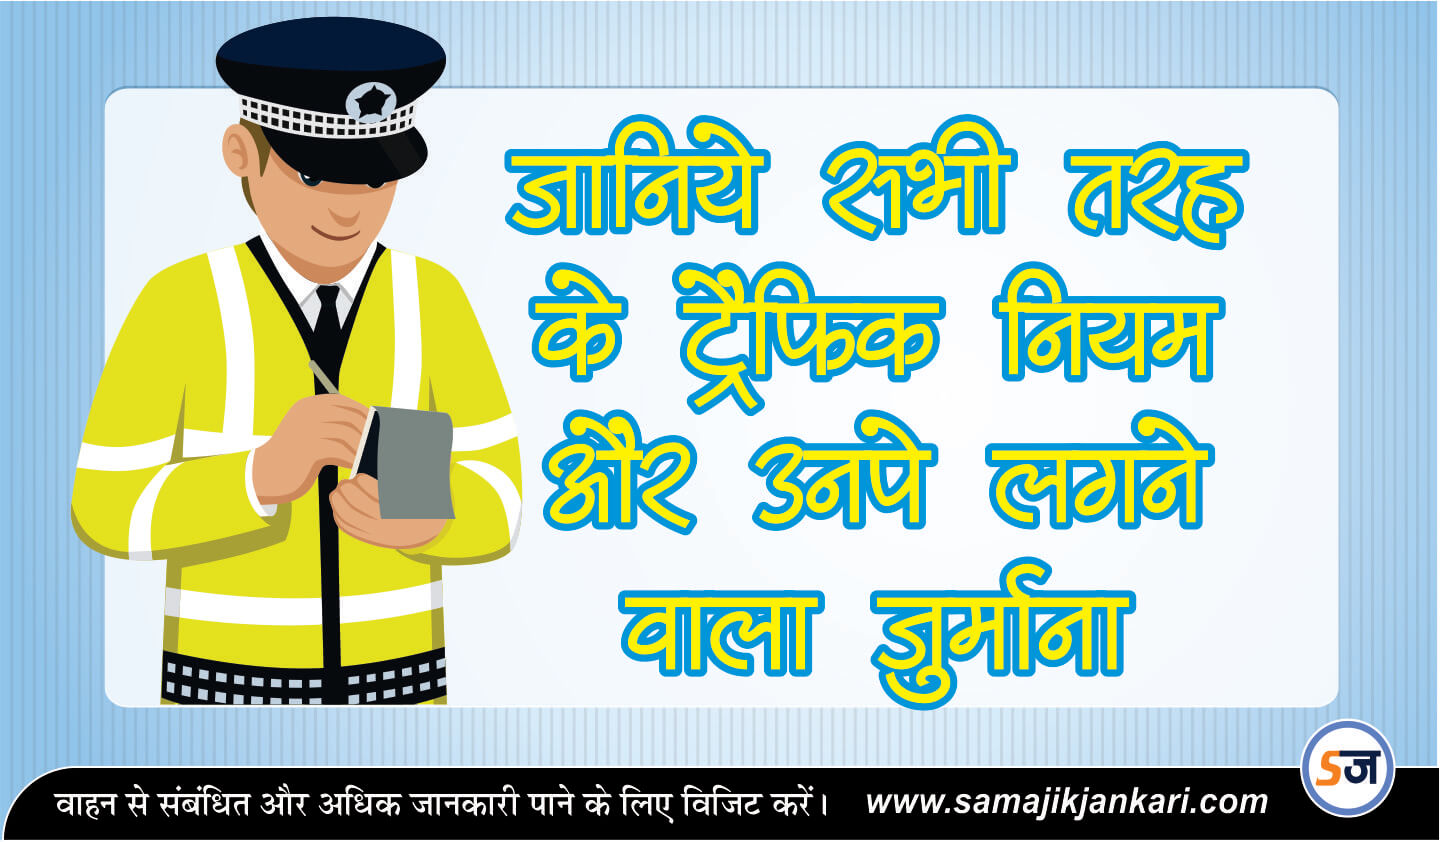 All Traffic rules and Fines in Hindi